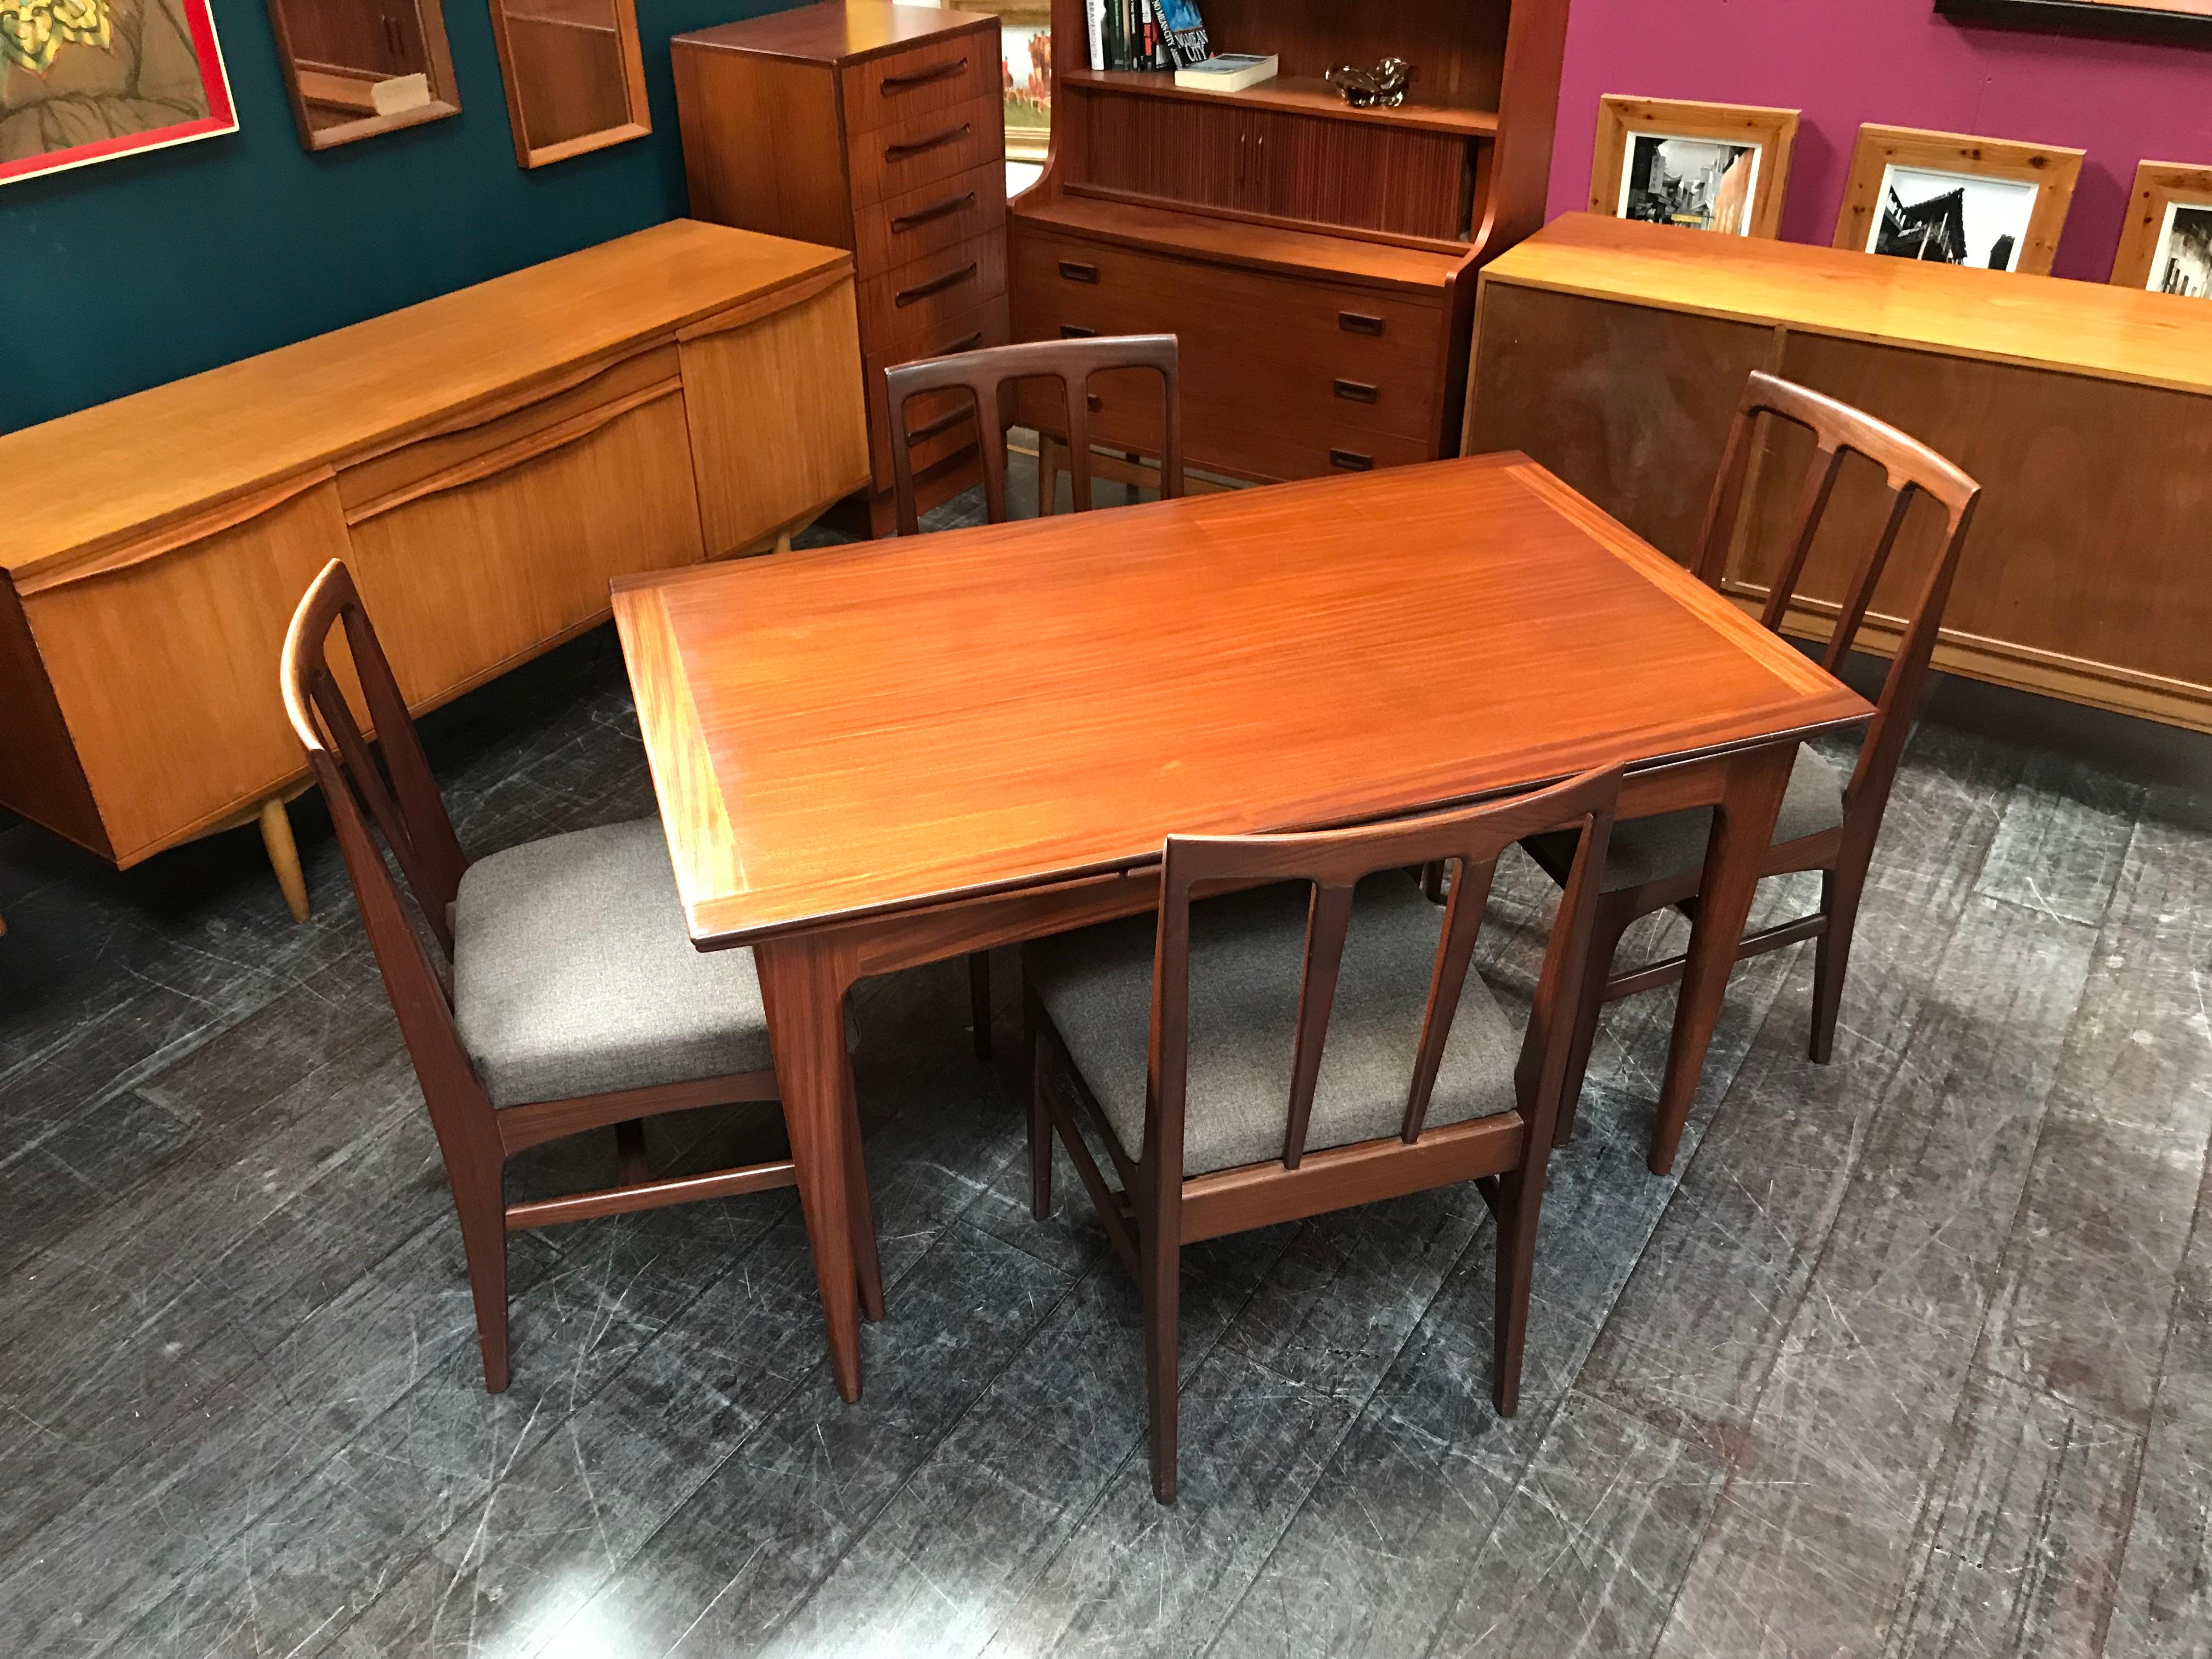 An extending dining table and 4 chairs made from afrormosia wood and designed by John Herbert for A. Younger Ltd. This elegant, vintage mid-century dining set is of very high quality design and construction, with beautifully shaped legs. The chairs